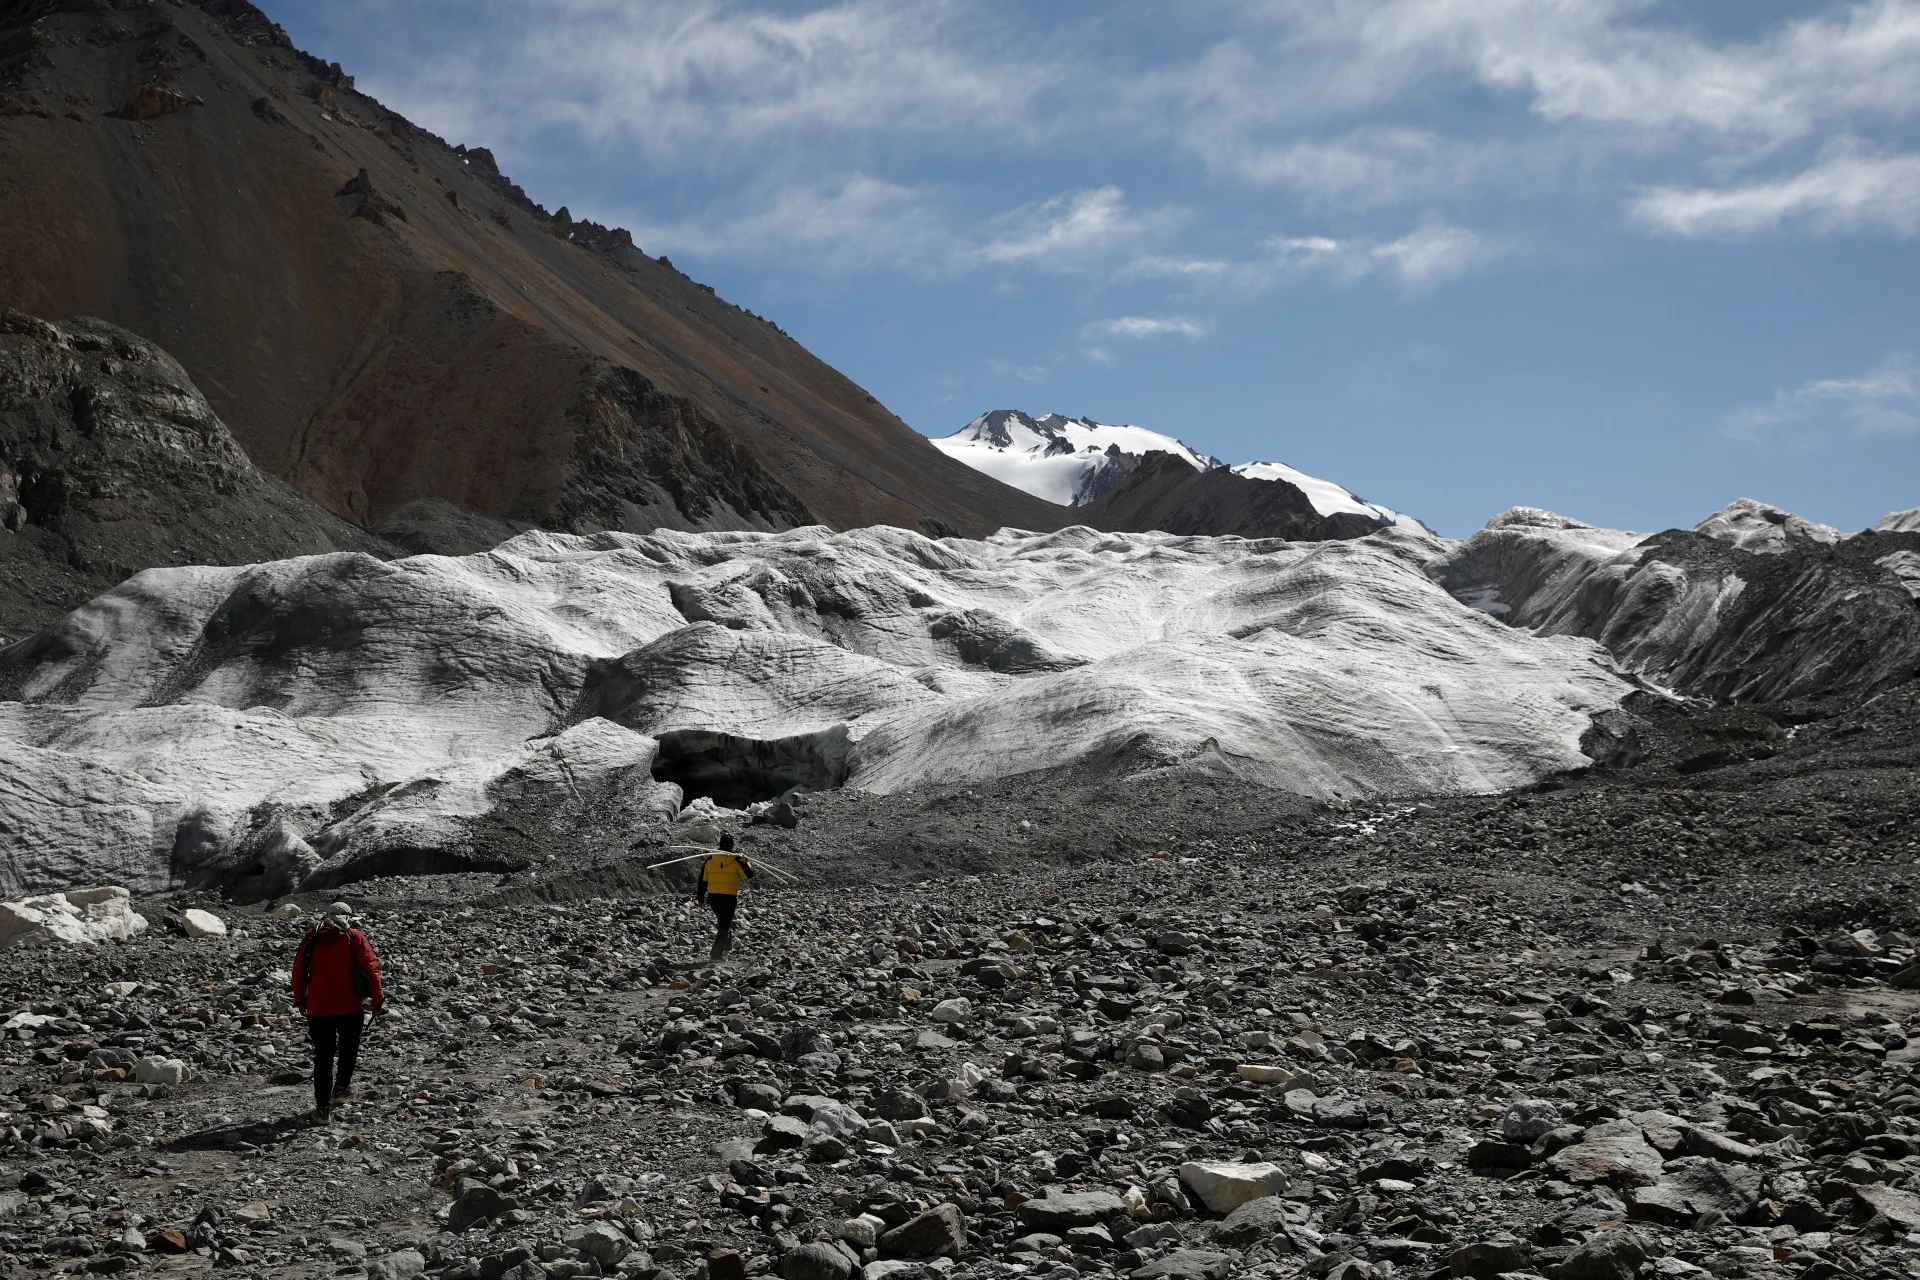 Scientists watch as remote Chinese glaciers melt at 'shocking' pace